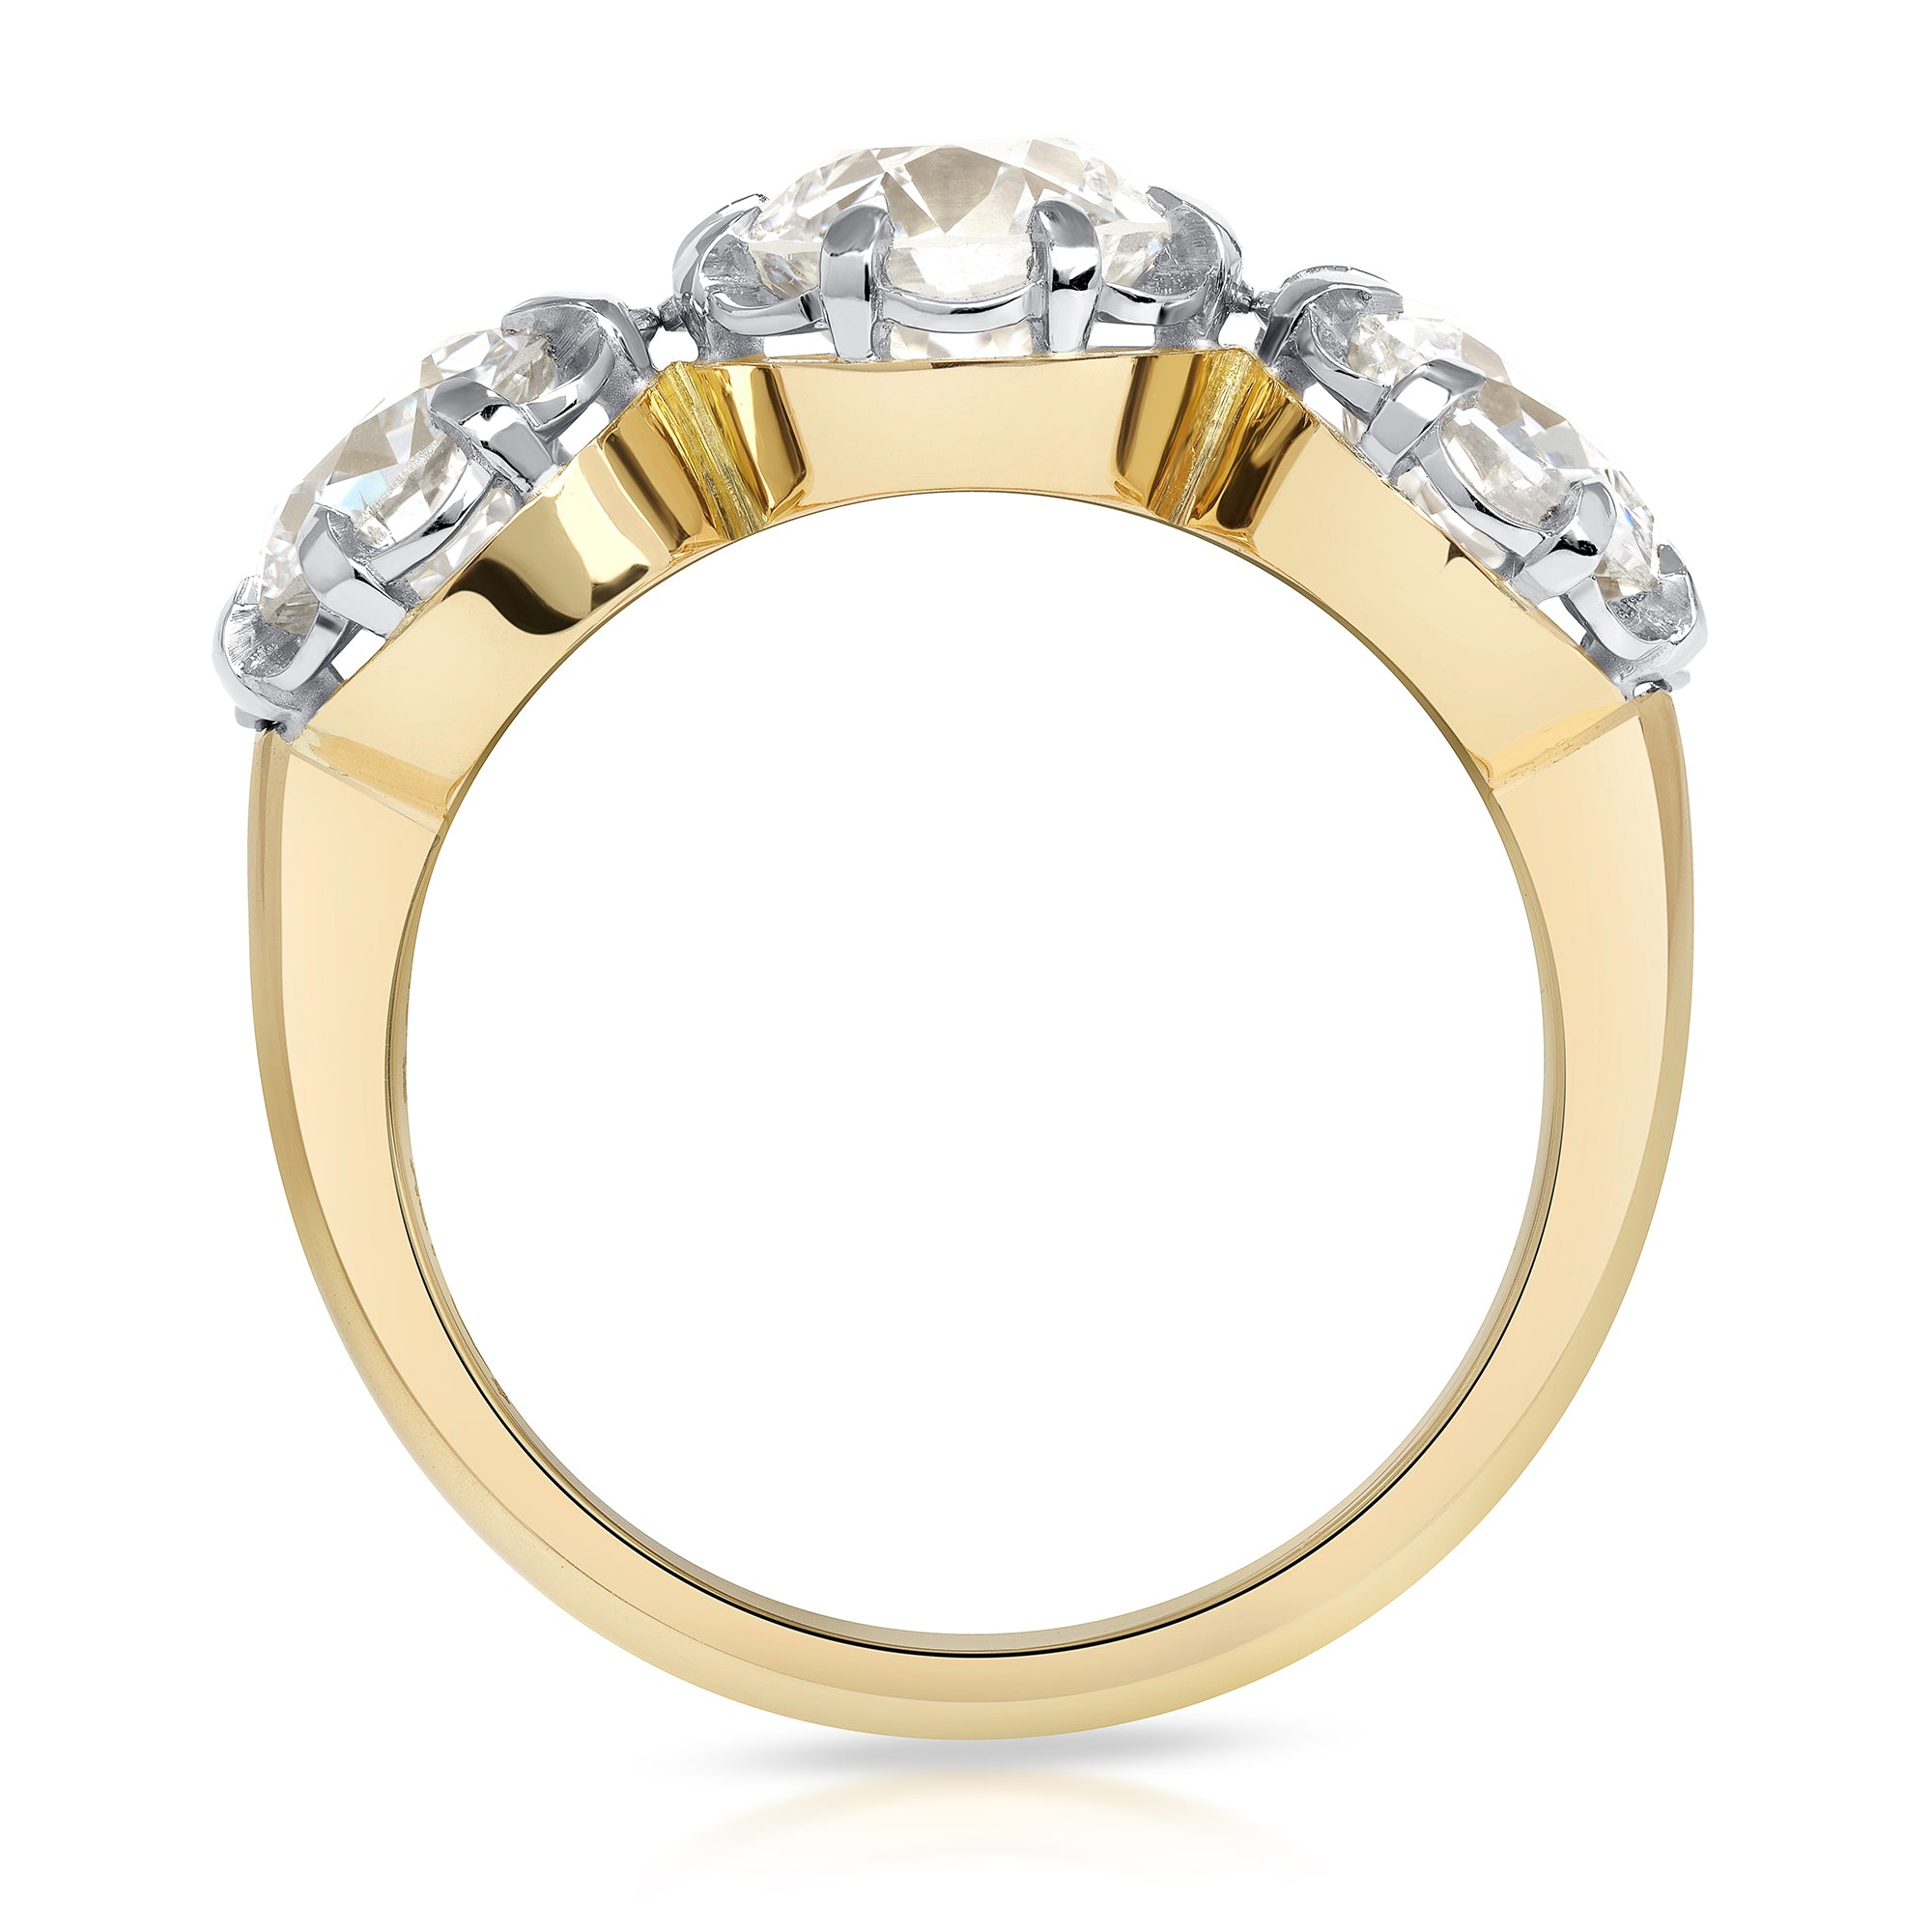 SINGLE STONE THREE STONE JOLENE RING featuring 1.34ct H/SI2 old European cut diamond with 2.05ctw old European cut accent diamonds prong set in a handcrafted 18K yellow gold and platinum mounting.